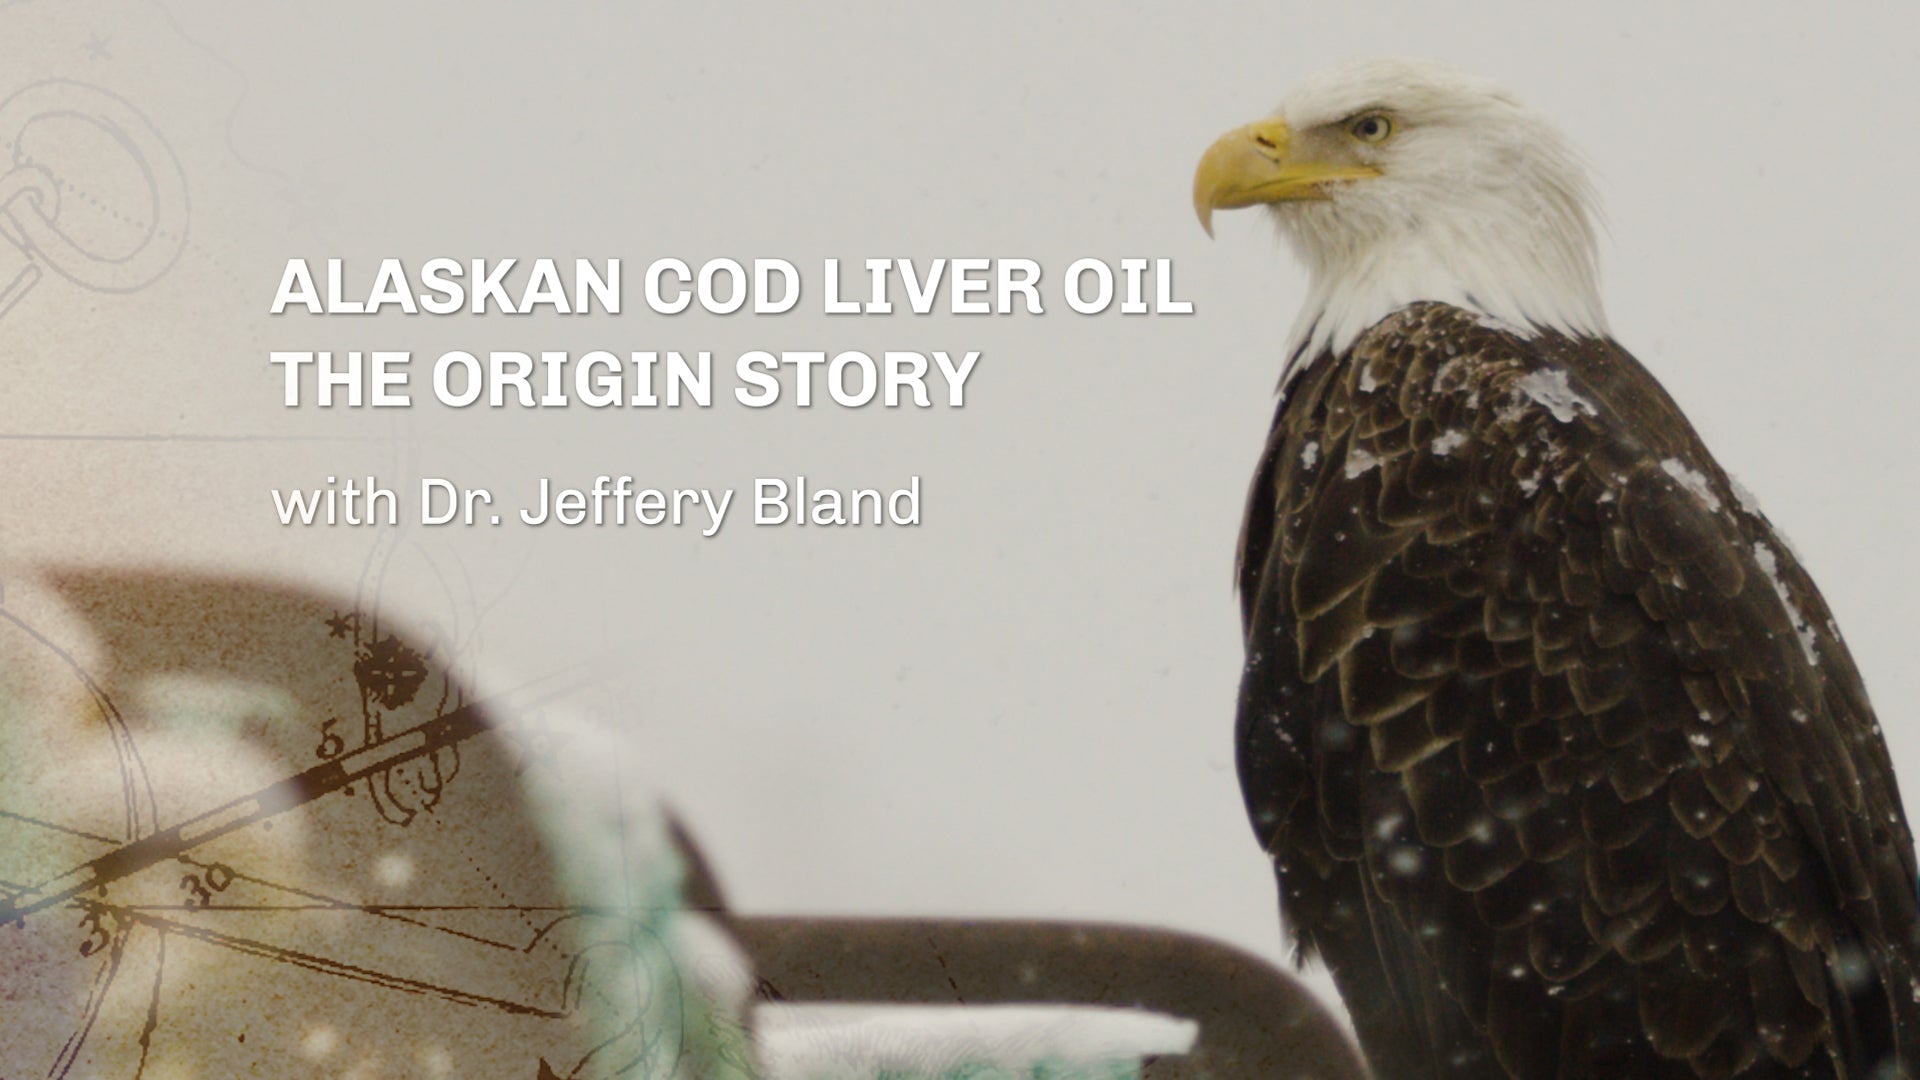 Dr. Jeffrey Bland answers "Why is Alaskan Cod Liver Oil so special?"